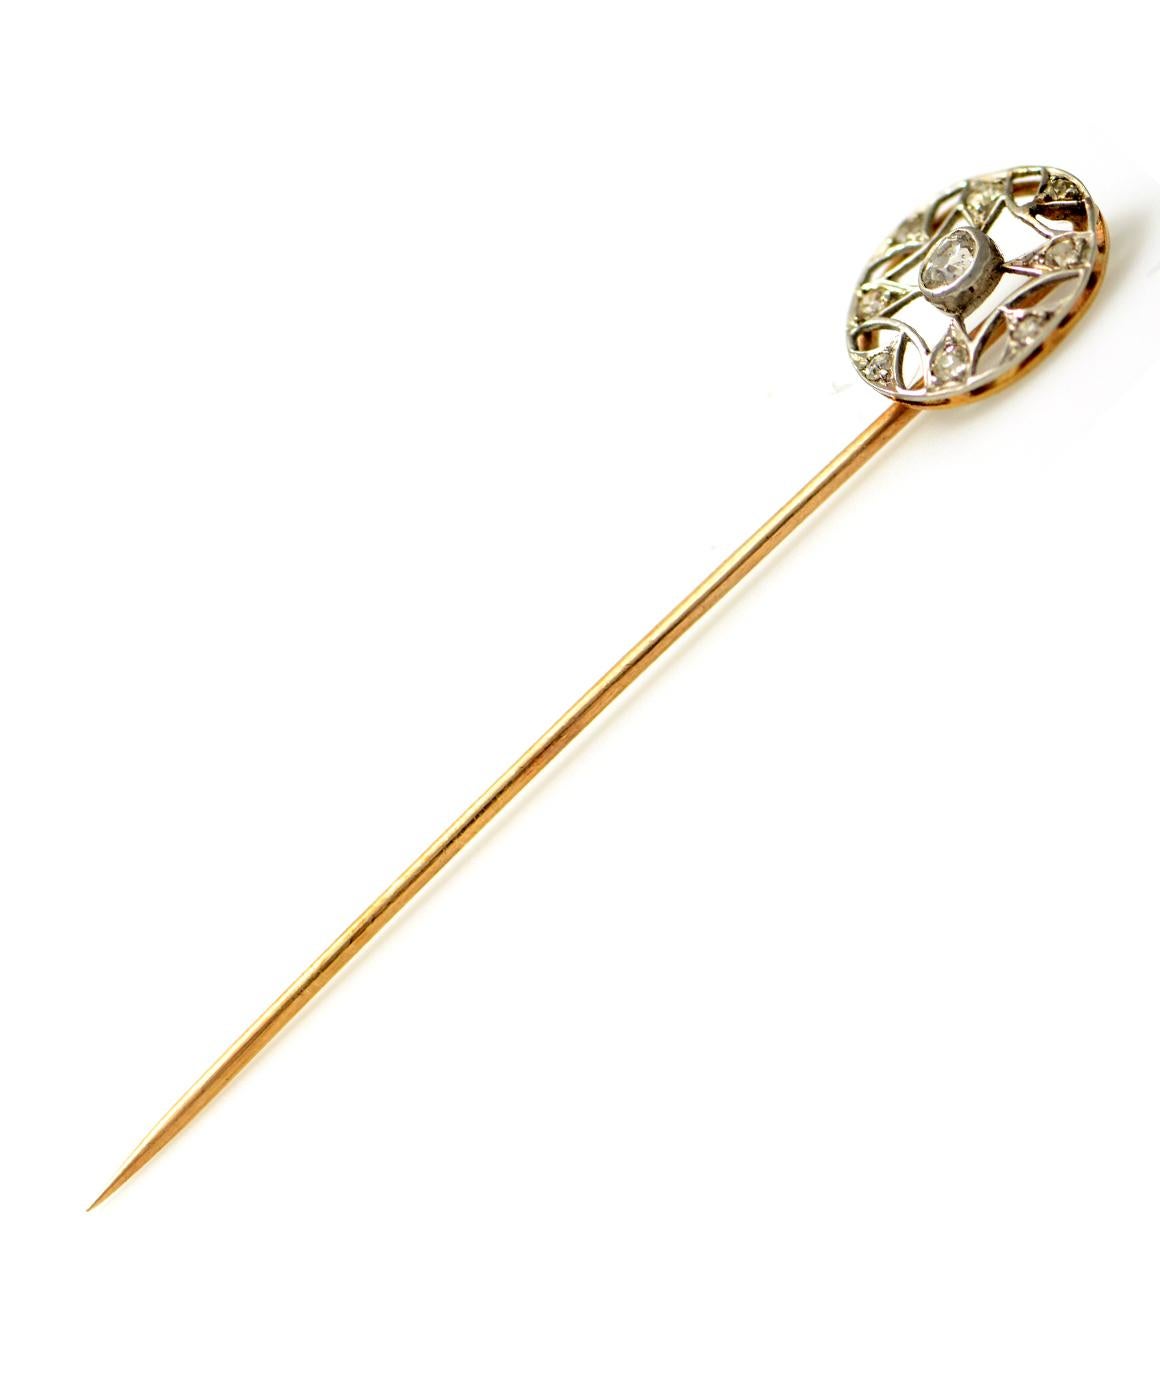 Women's or Men's Solid 14 Karat White and Yellow Gold Antique Natural Diamond Stick Pin 1.7g